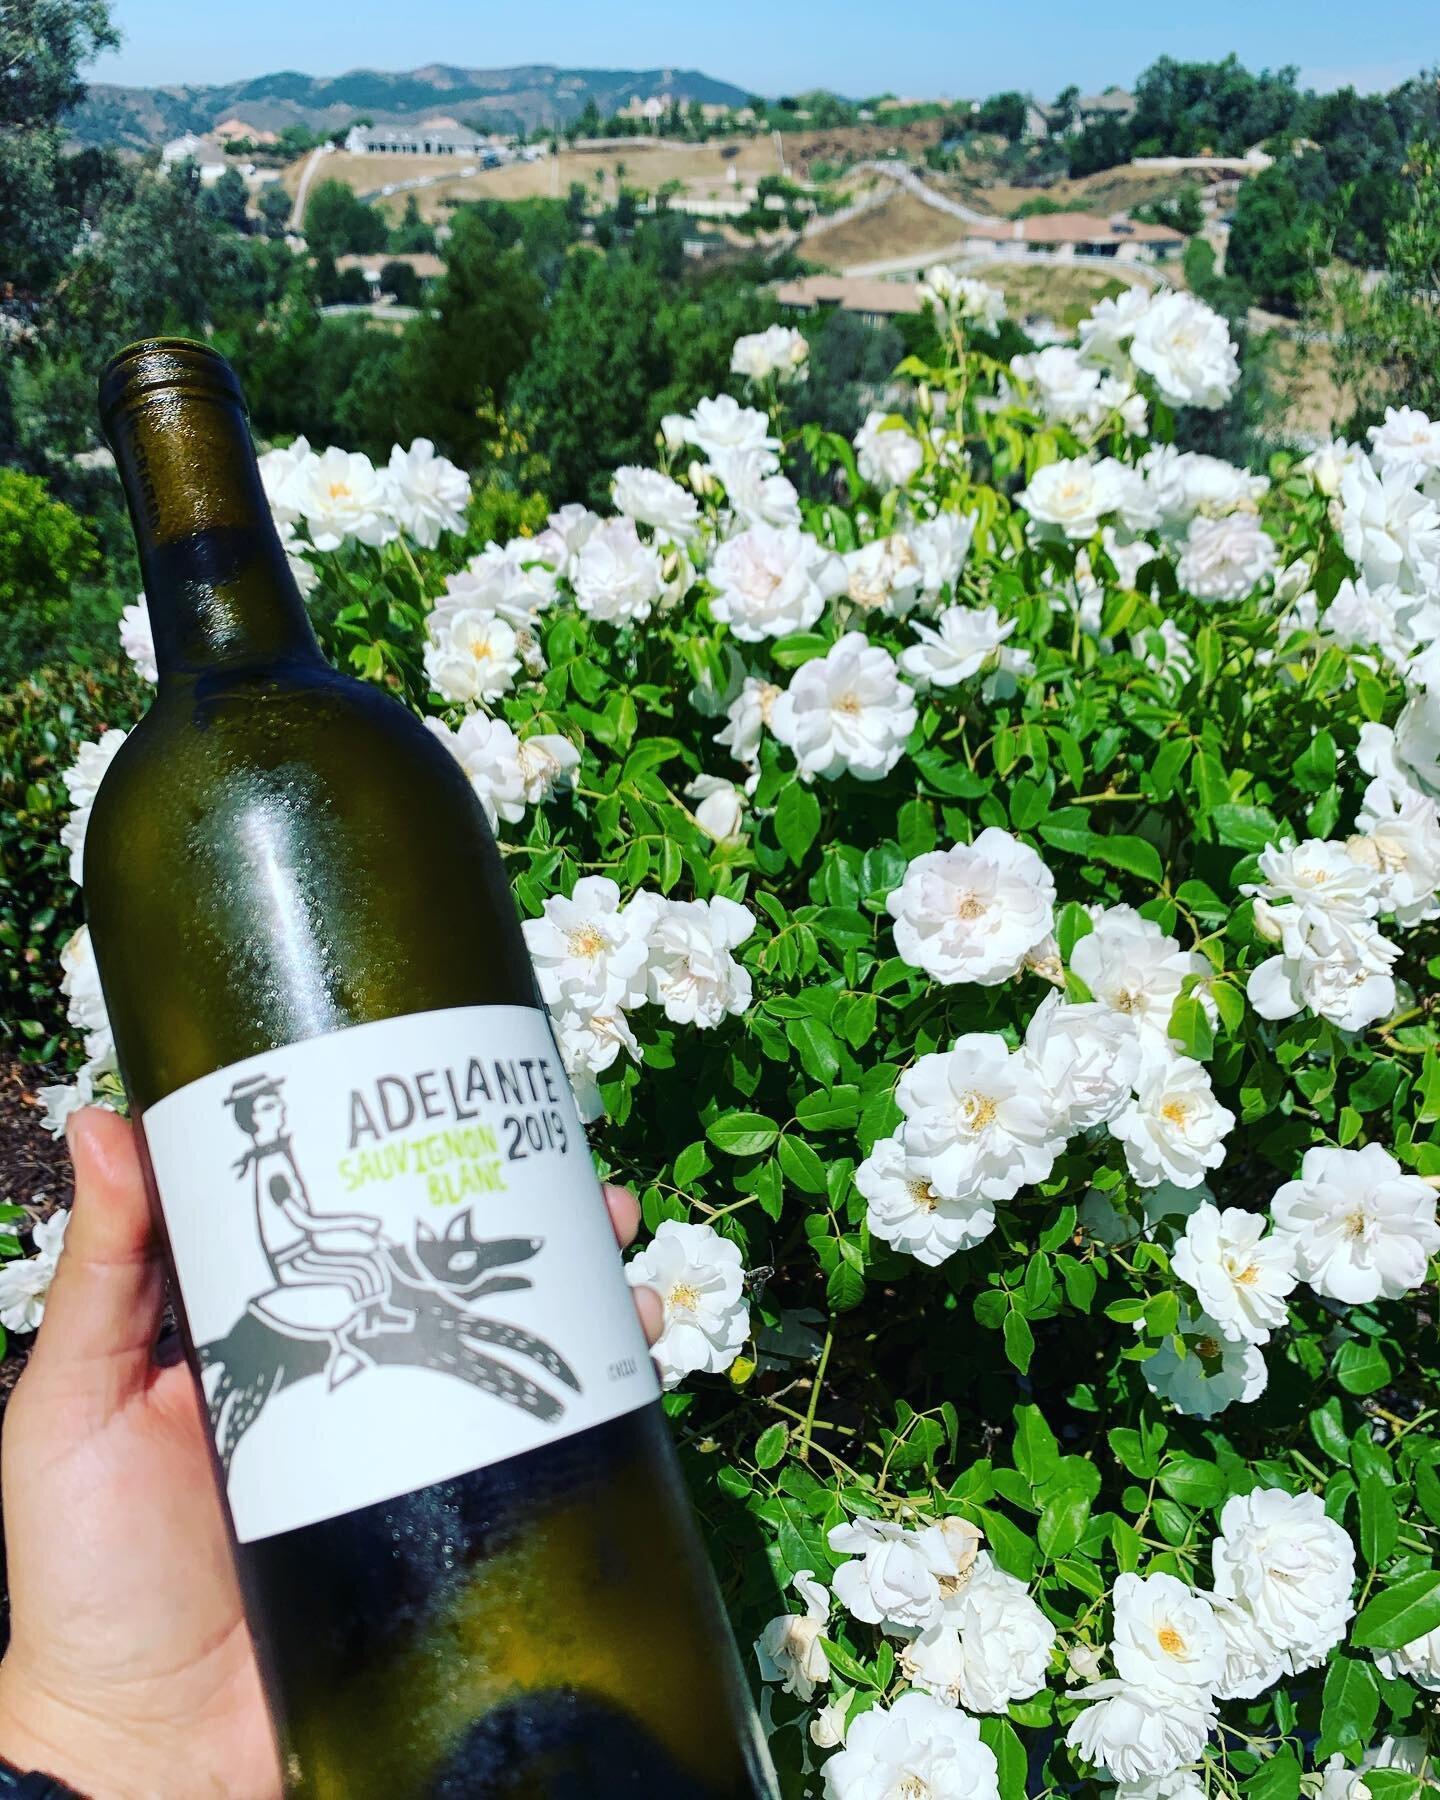 ADELANTE SALE IS BACCCK !!
Just sippin this zesty Chilean Sauvignon blanc today. This bright wine shows lime, green apple, and lemongrass notes. Goes great with fish! 

Wanna know the best thing though?? It&rsquo;s back on sale for $15!! Woah! what? 